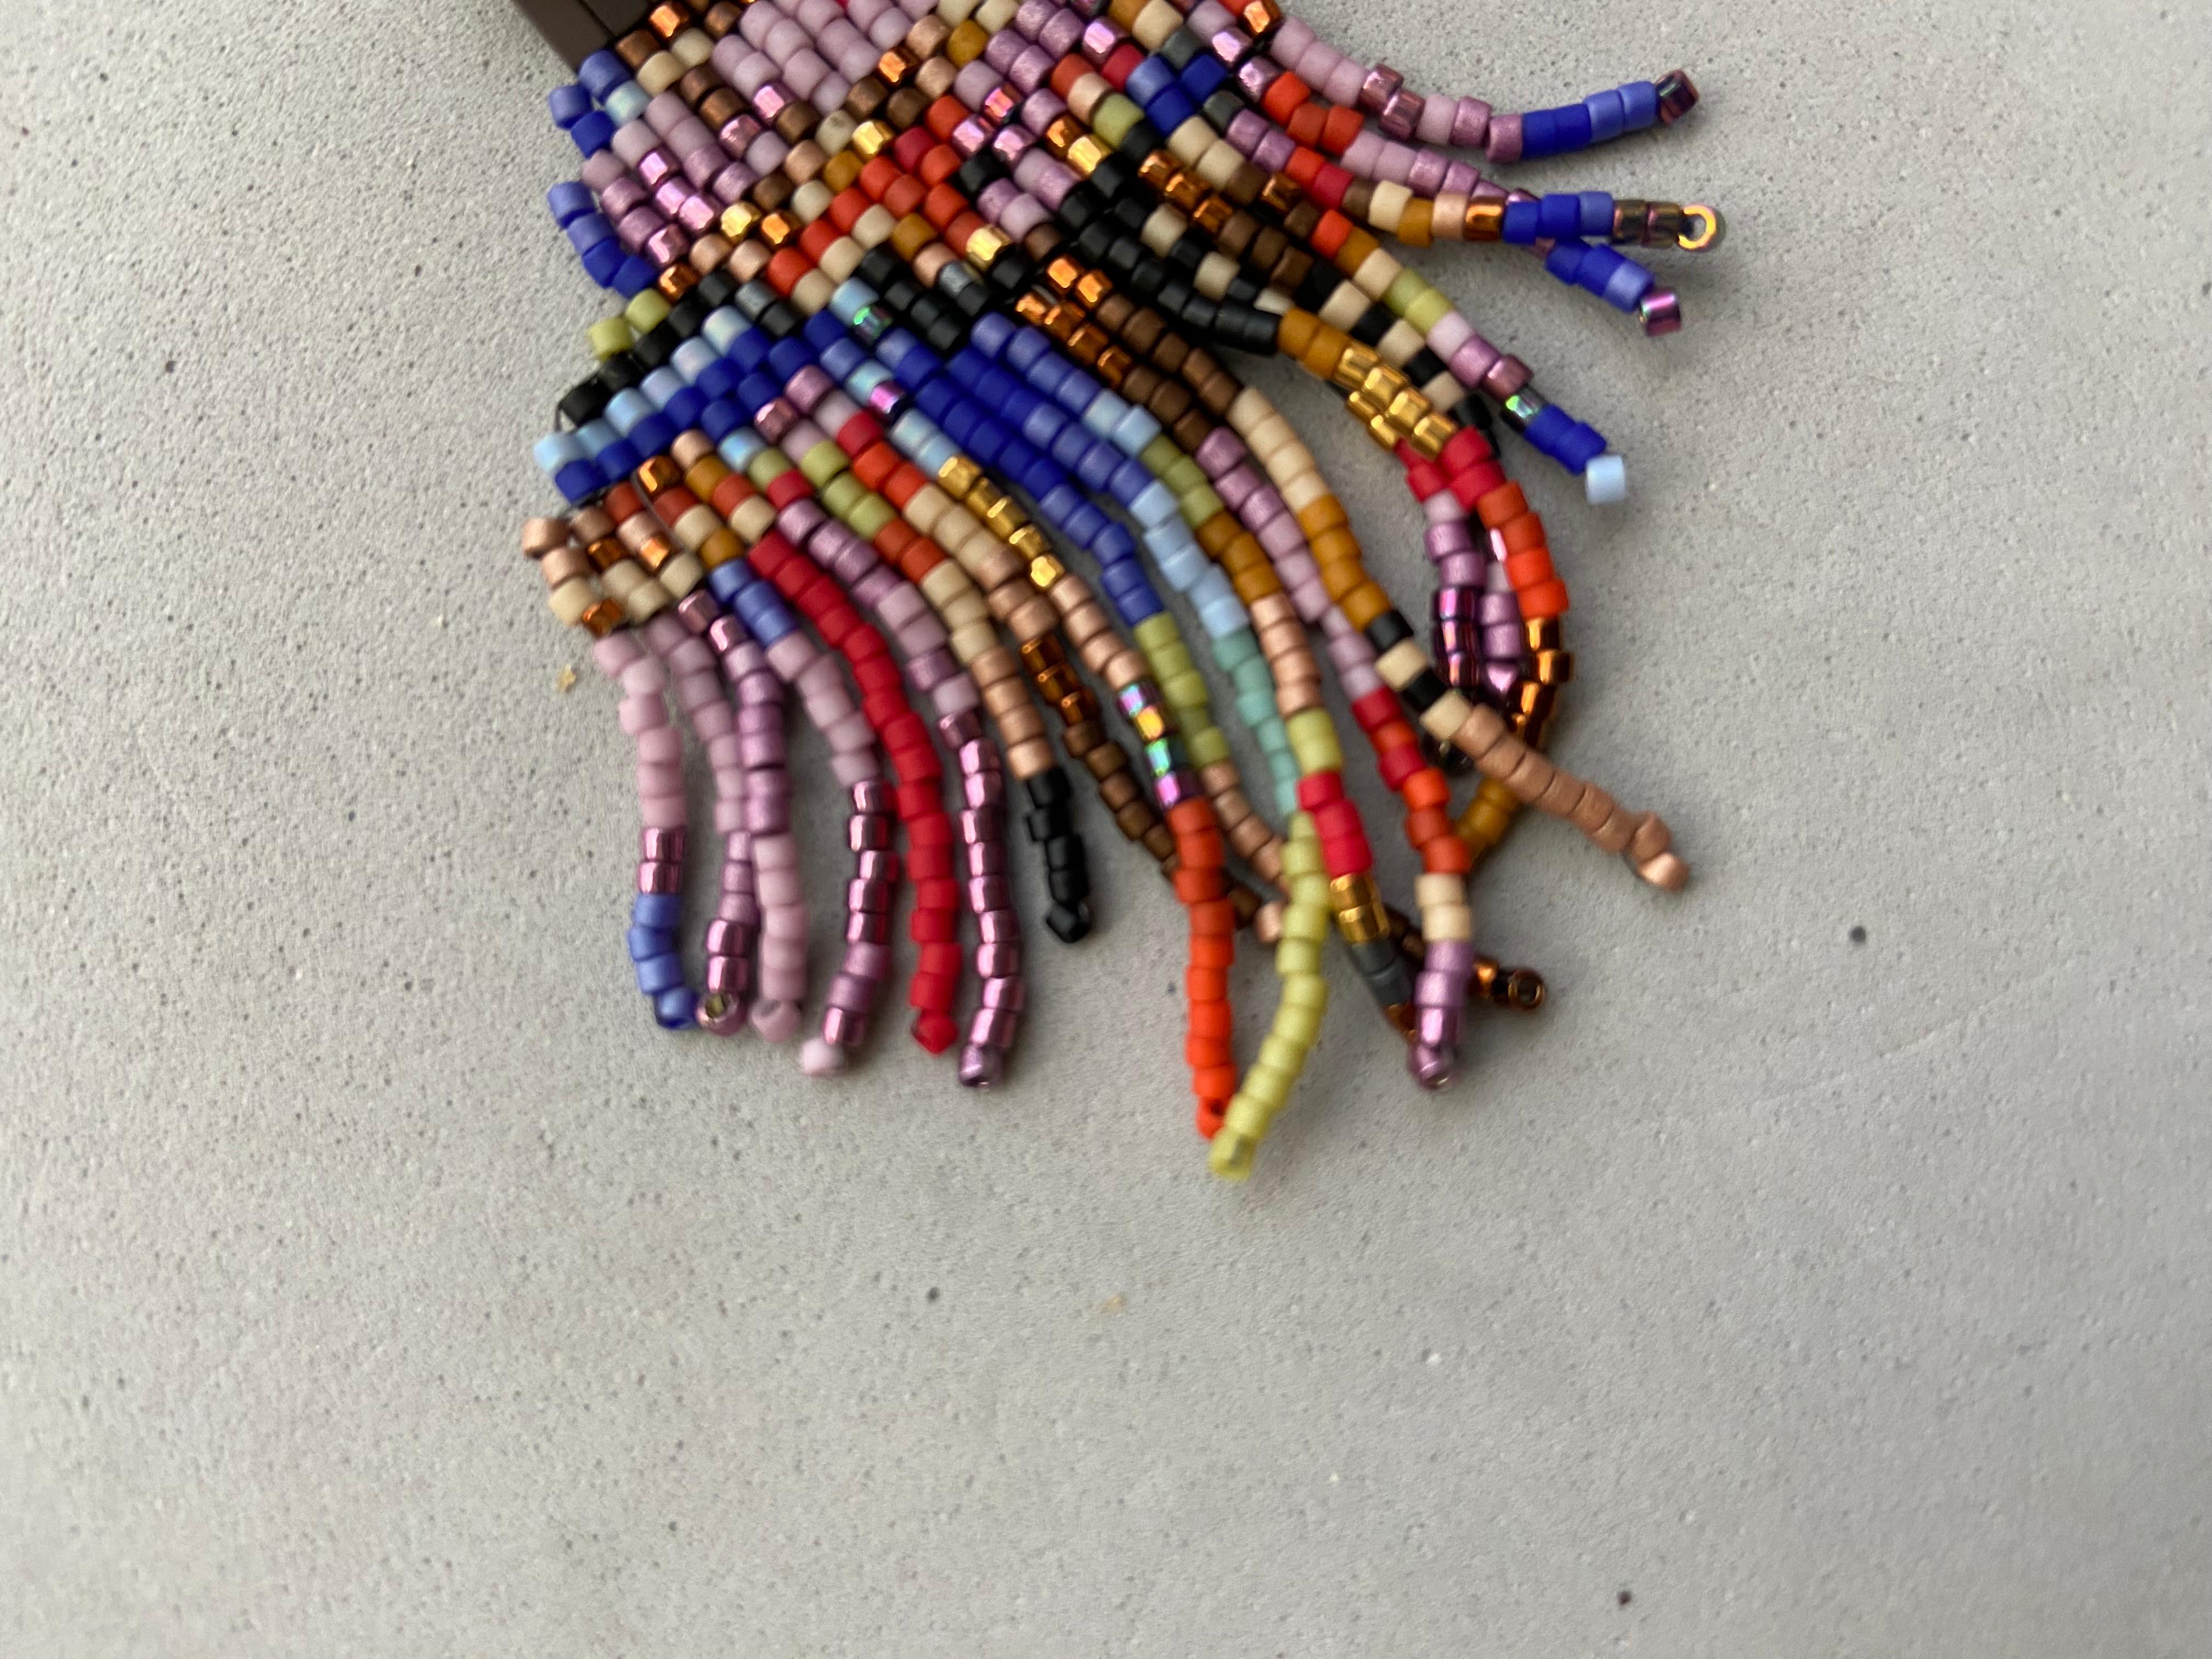 These earrings have the lines and look of a fine art painting.  They are inspired by artists like Jean-Michel Basquiat or Wassily and their contemporary abstract aesthetic.  The pair are hand beaded with colorful glass beads and hematite gemstone. 